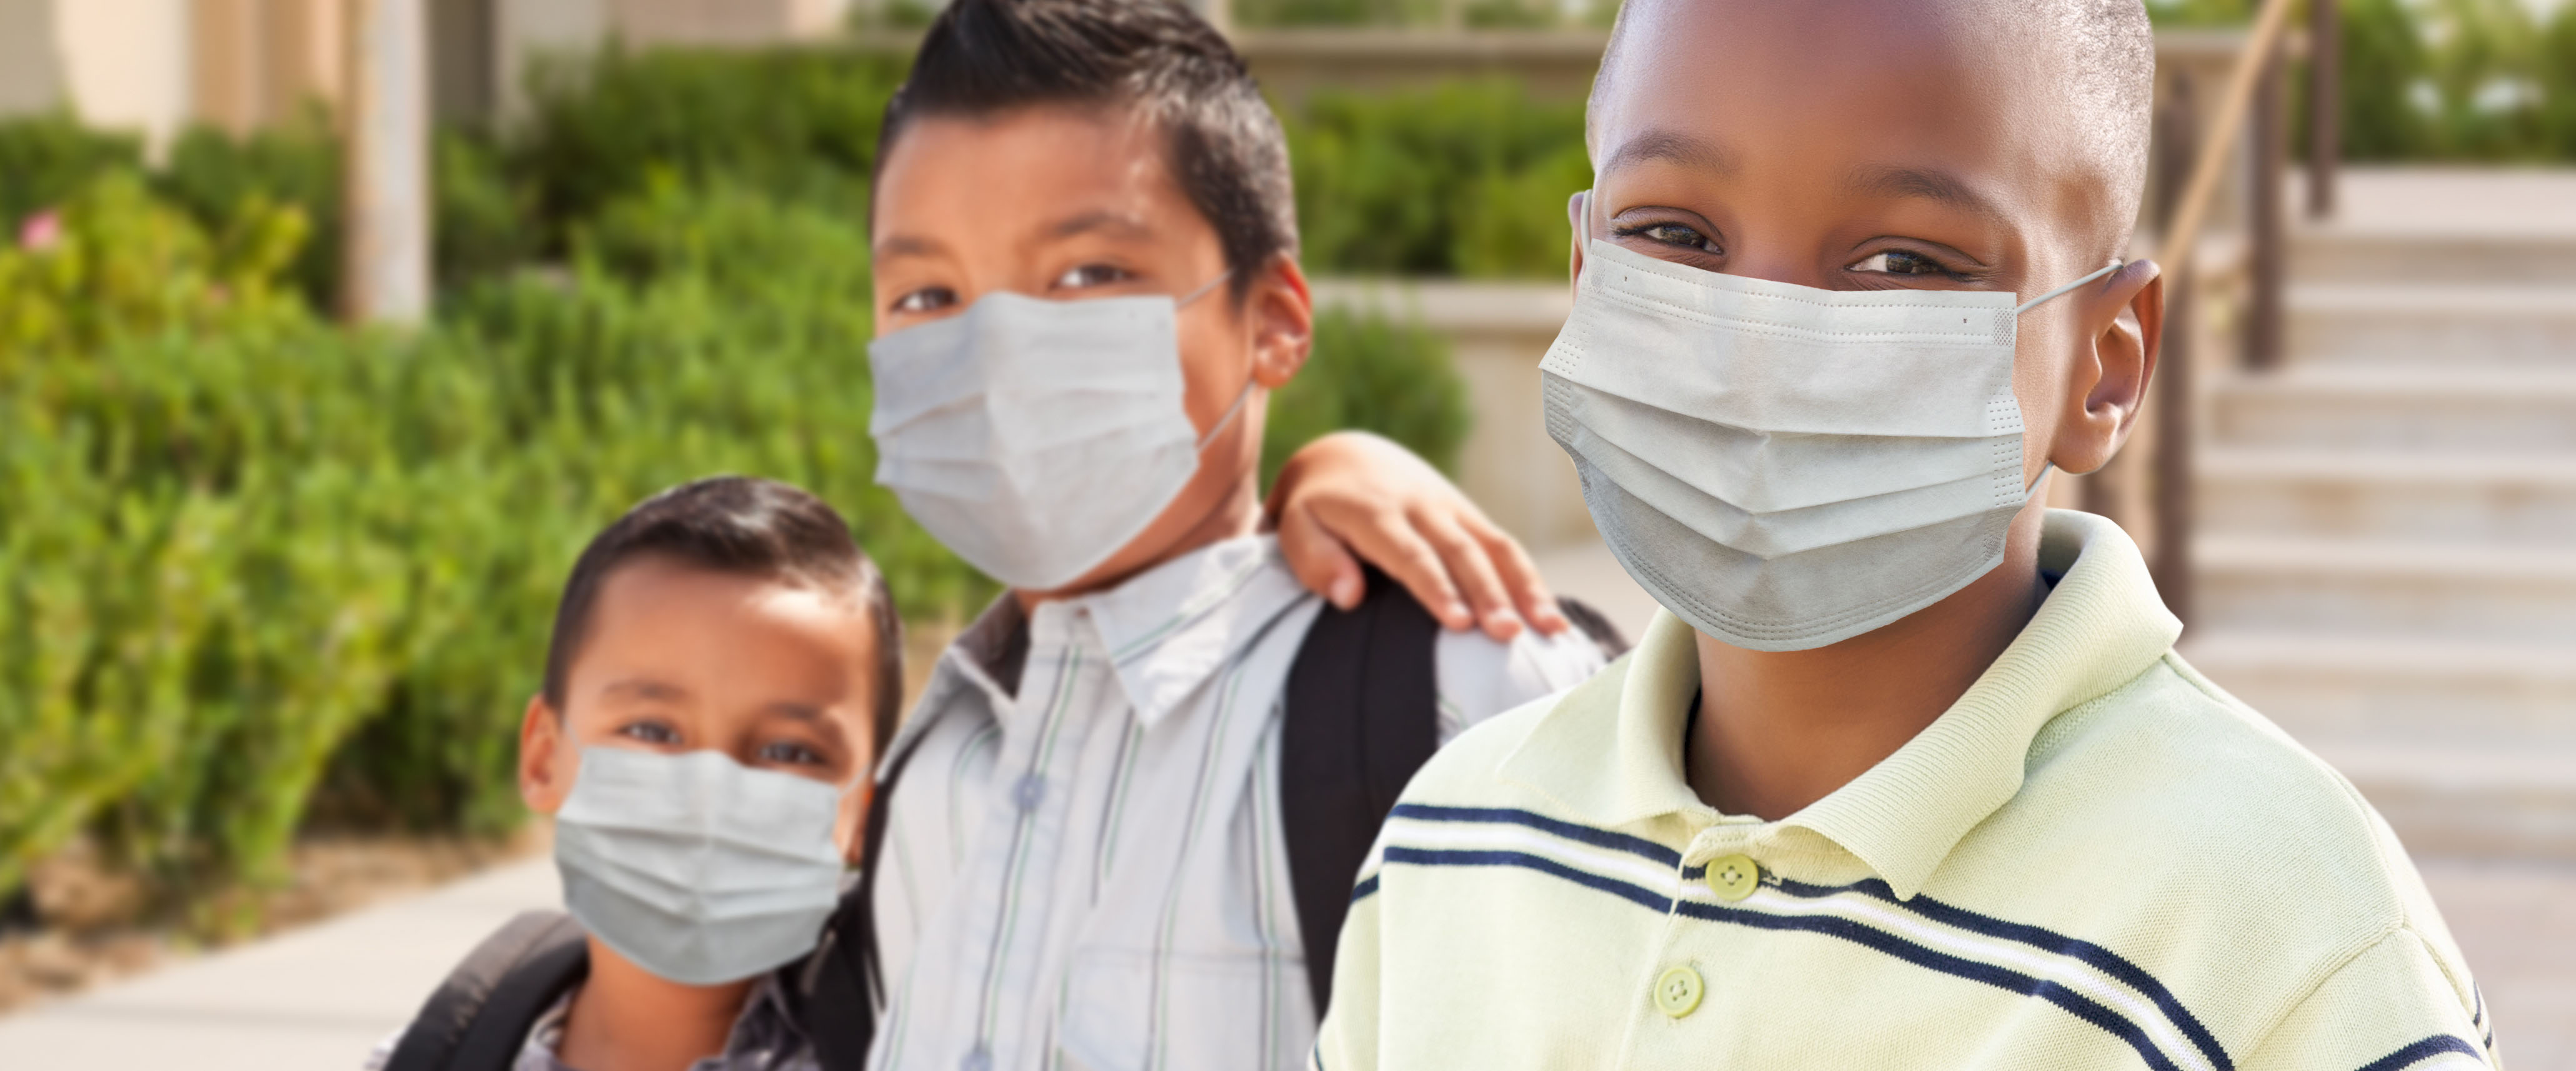 Two elementary-aged boys wearing bookbags and facemasks with their arms around each other's shoulders, standing next to another elementary-aged boy smiling wearing a face mask outside a school